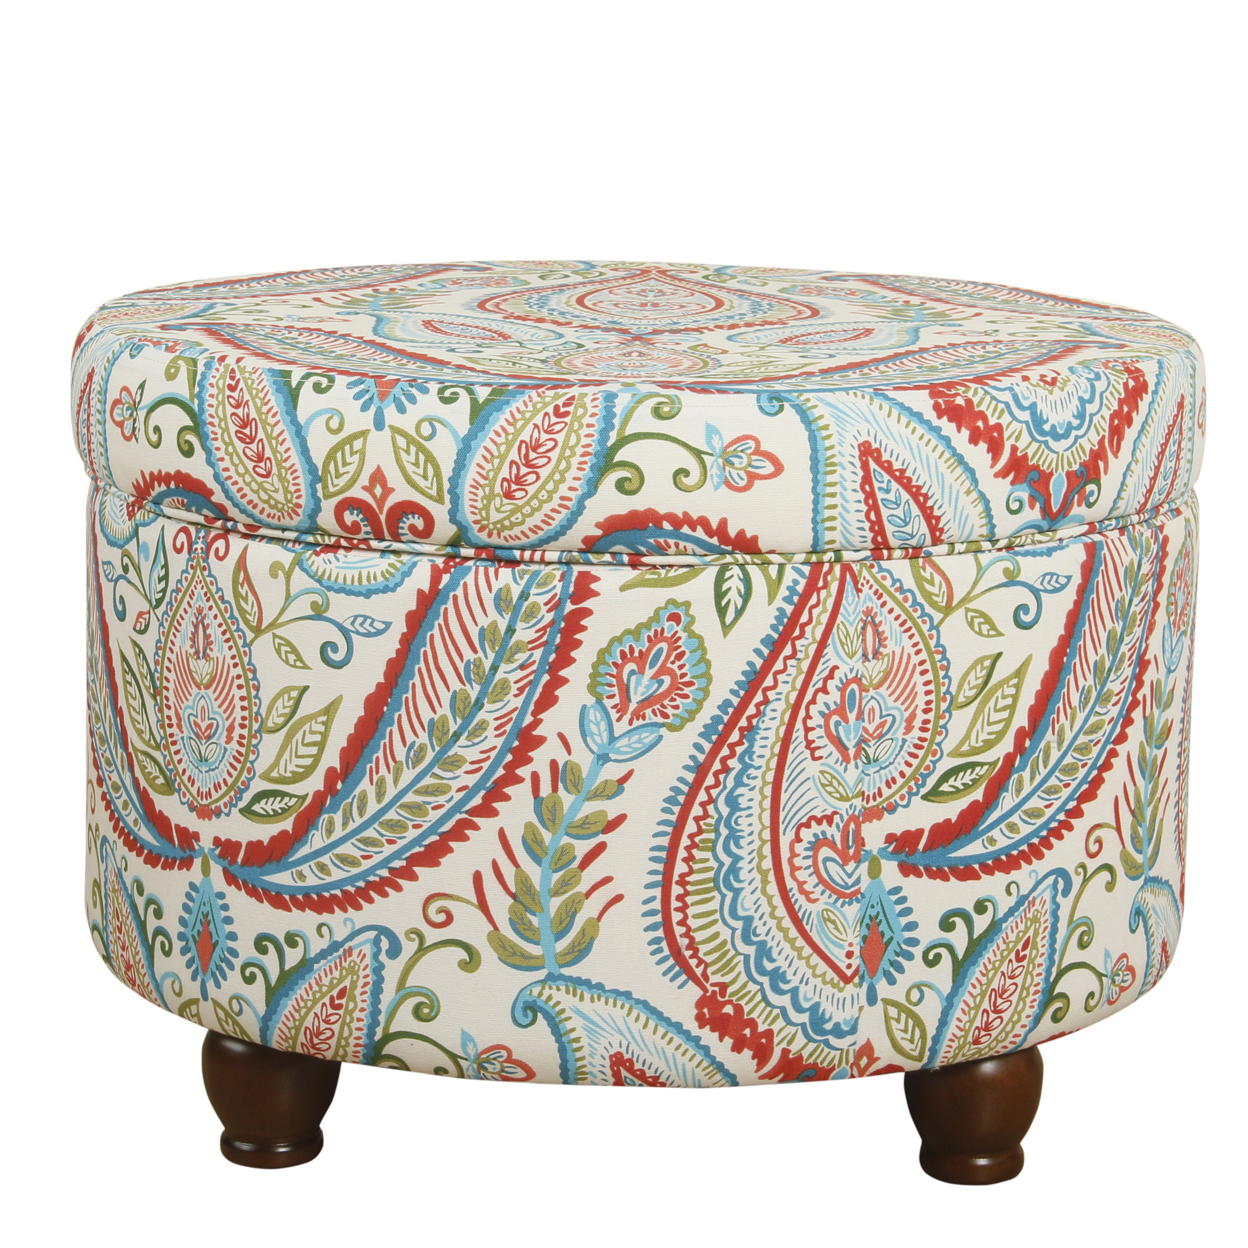 Paisley Pattern Fabric Upholstered Wooden Ottoman With Hidden Storage, Multicolor- Saltoro Sherpi